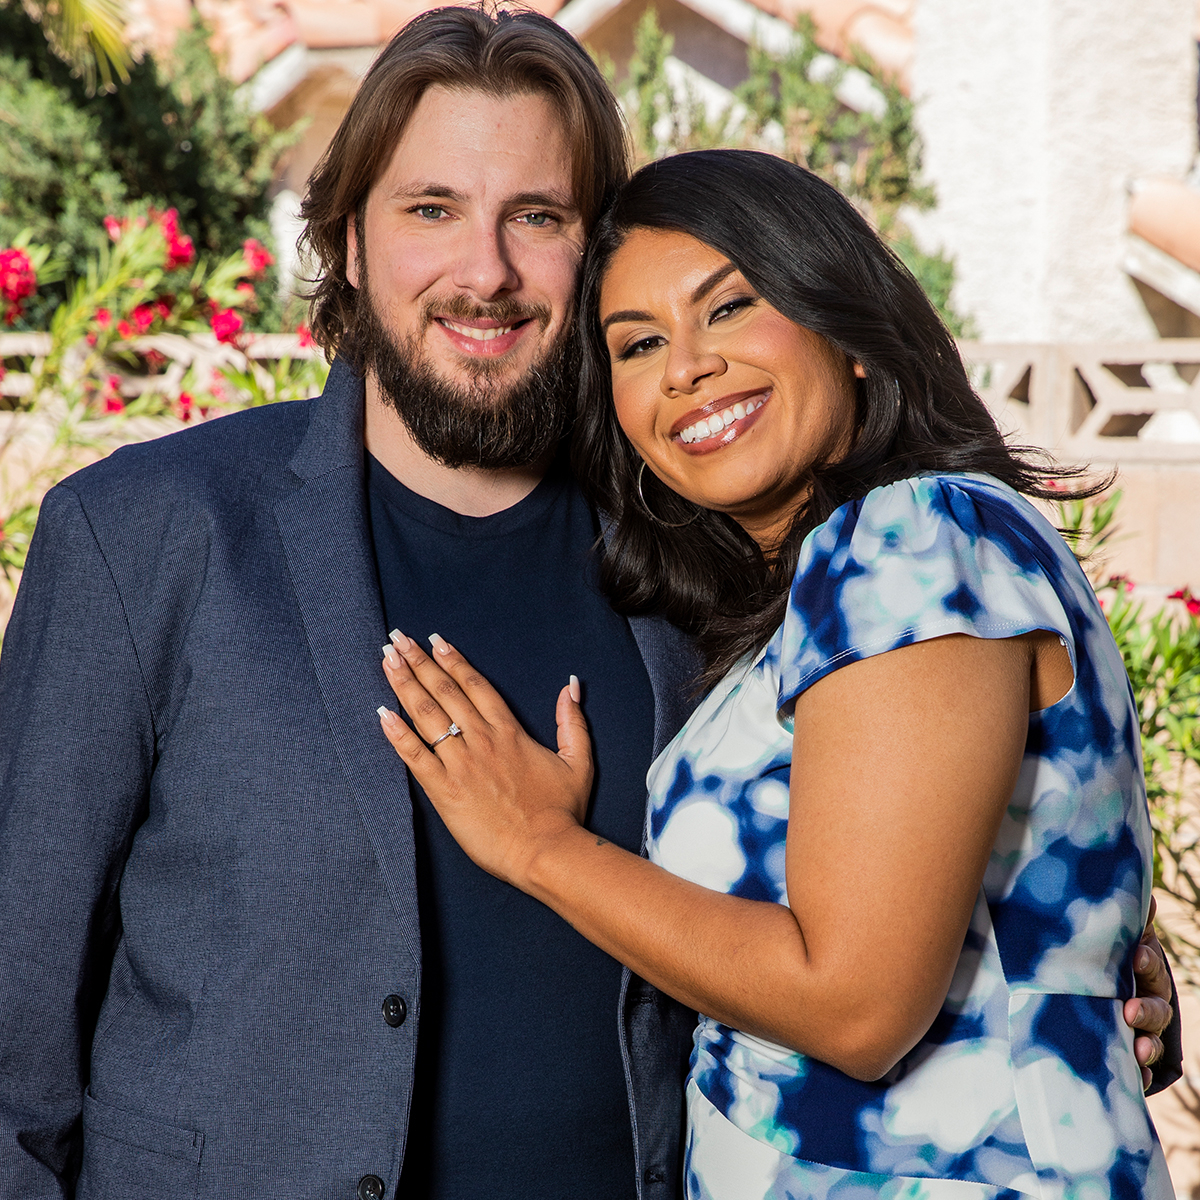 Surprise! 90 Day Fiancé’s Colt and Vanessa Married lineupmag